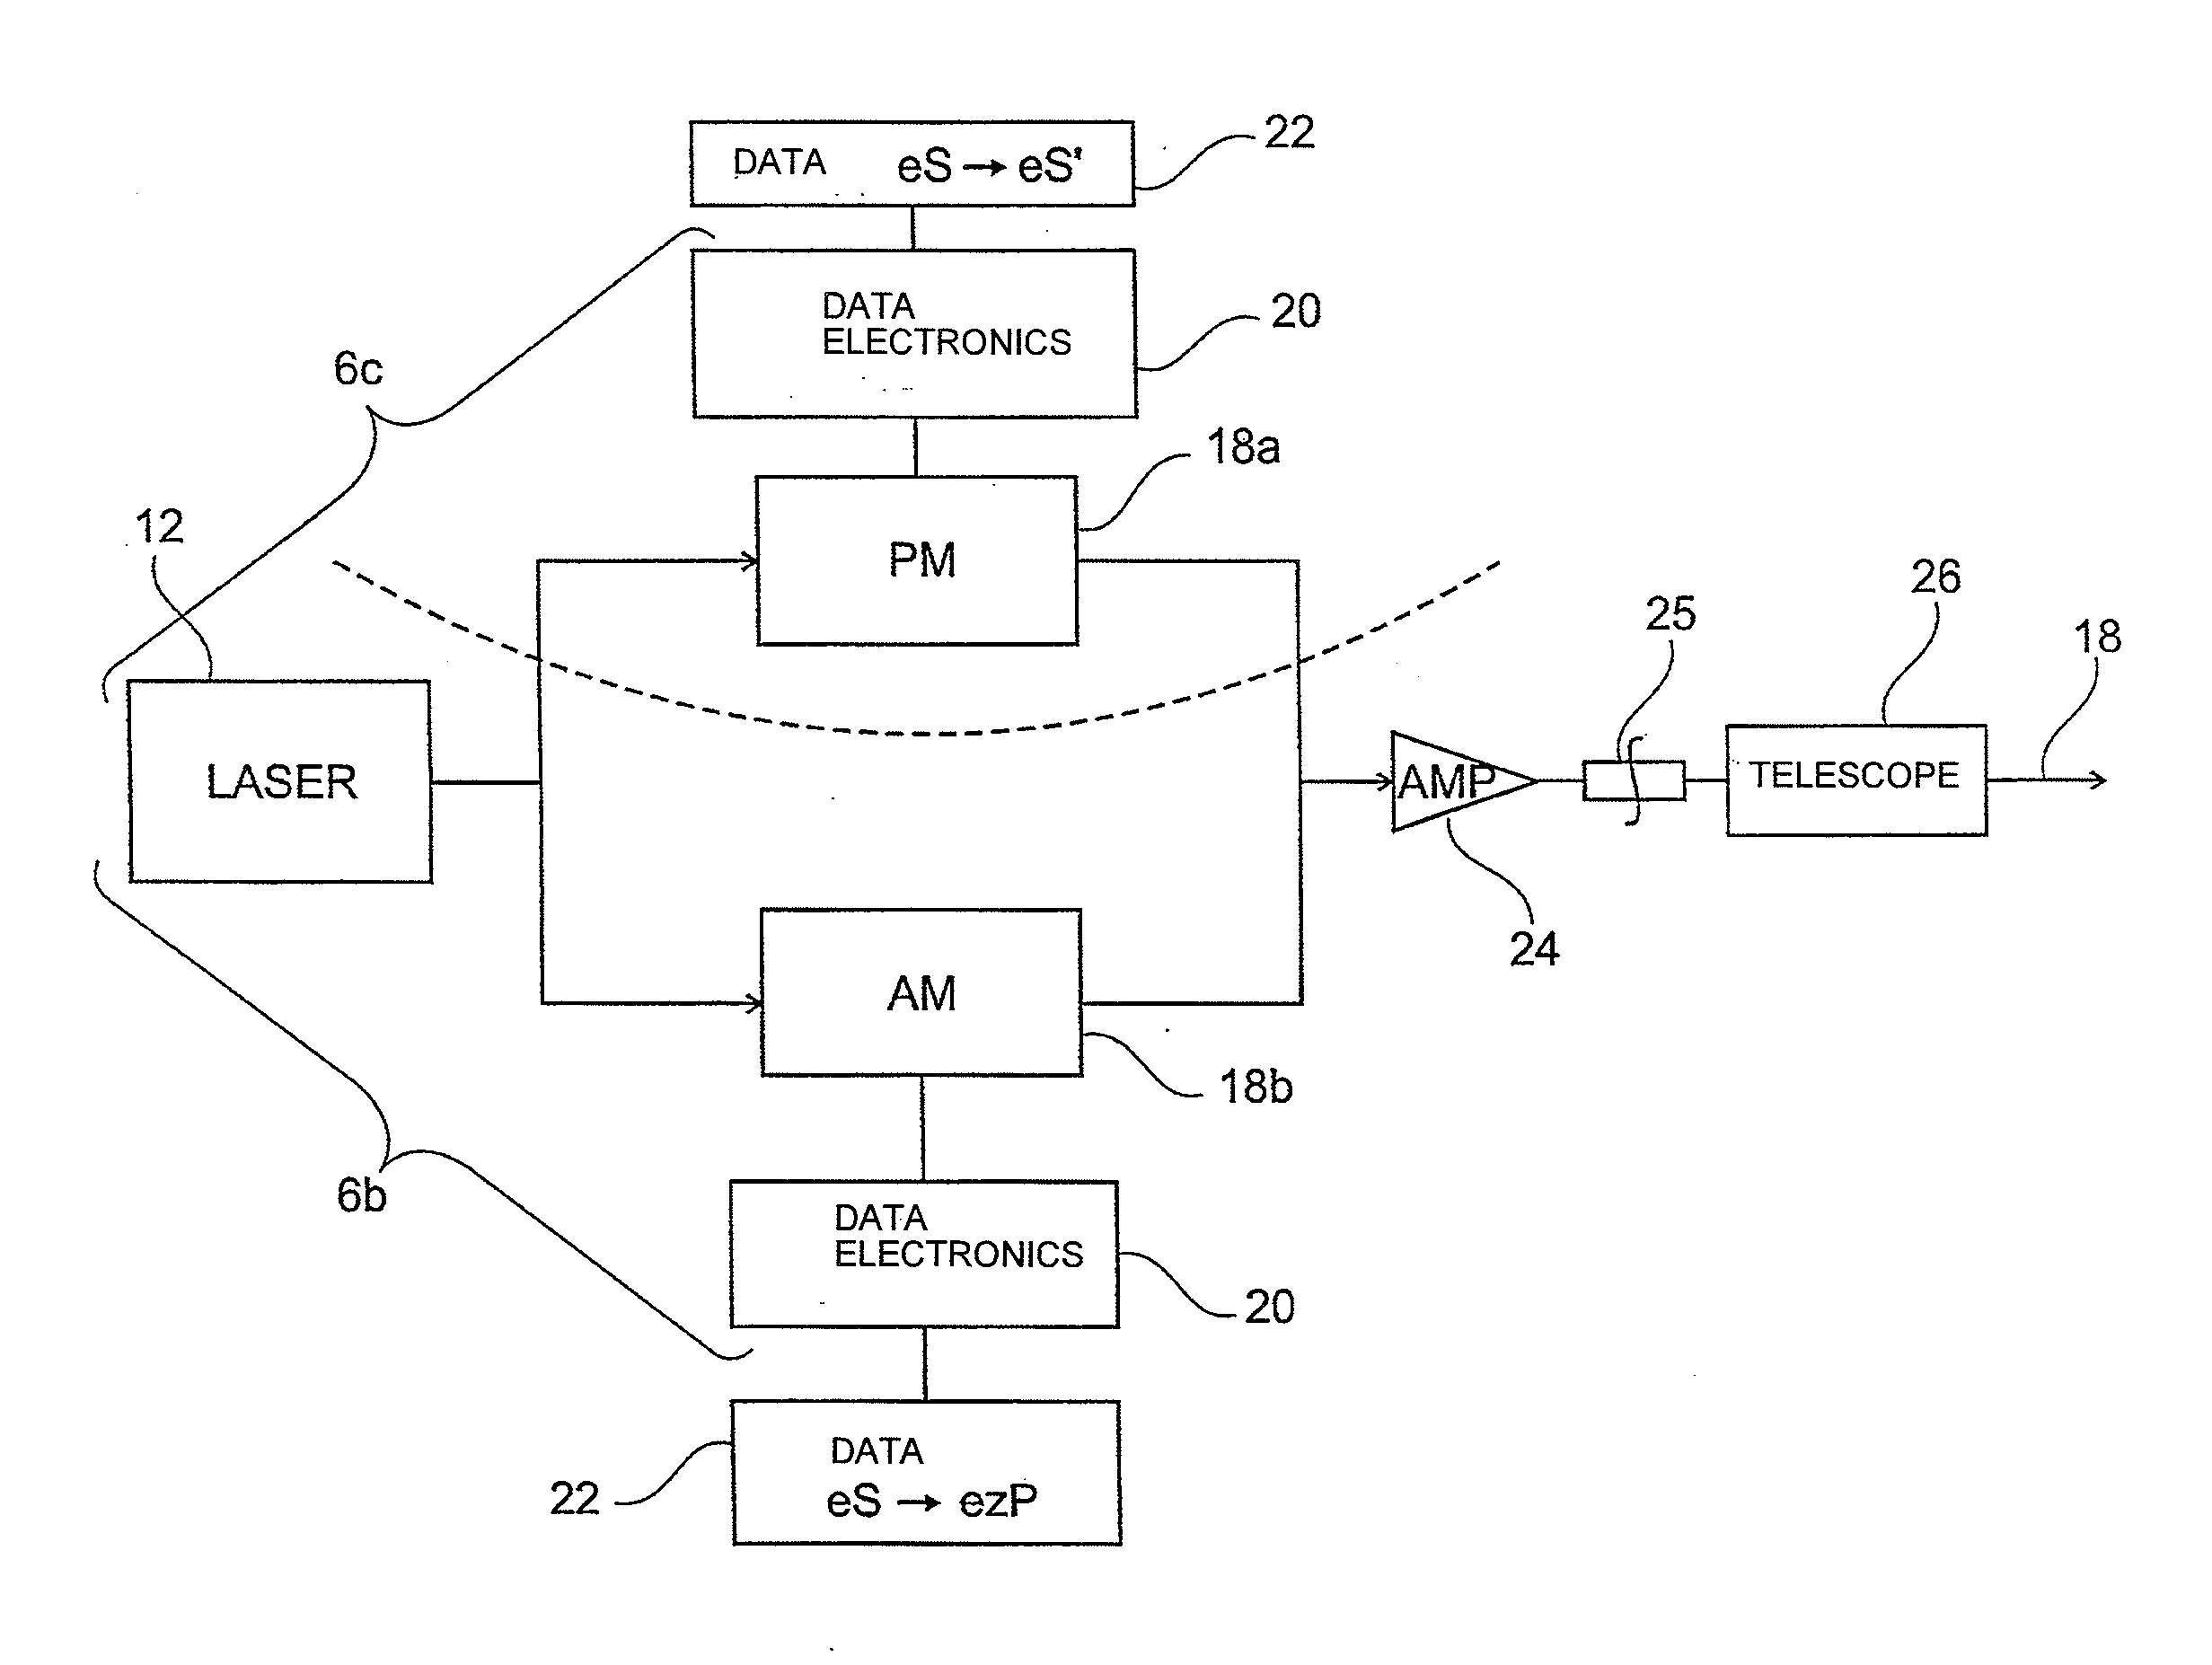 System and Method for Communication Between Two Communication Platforms